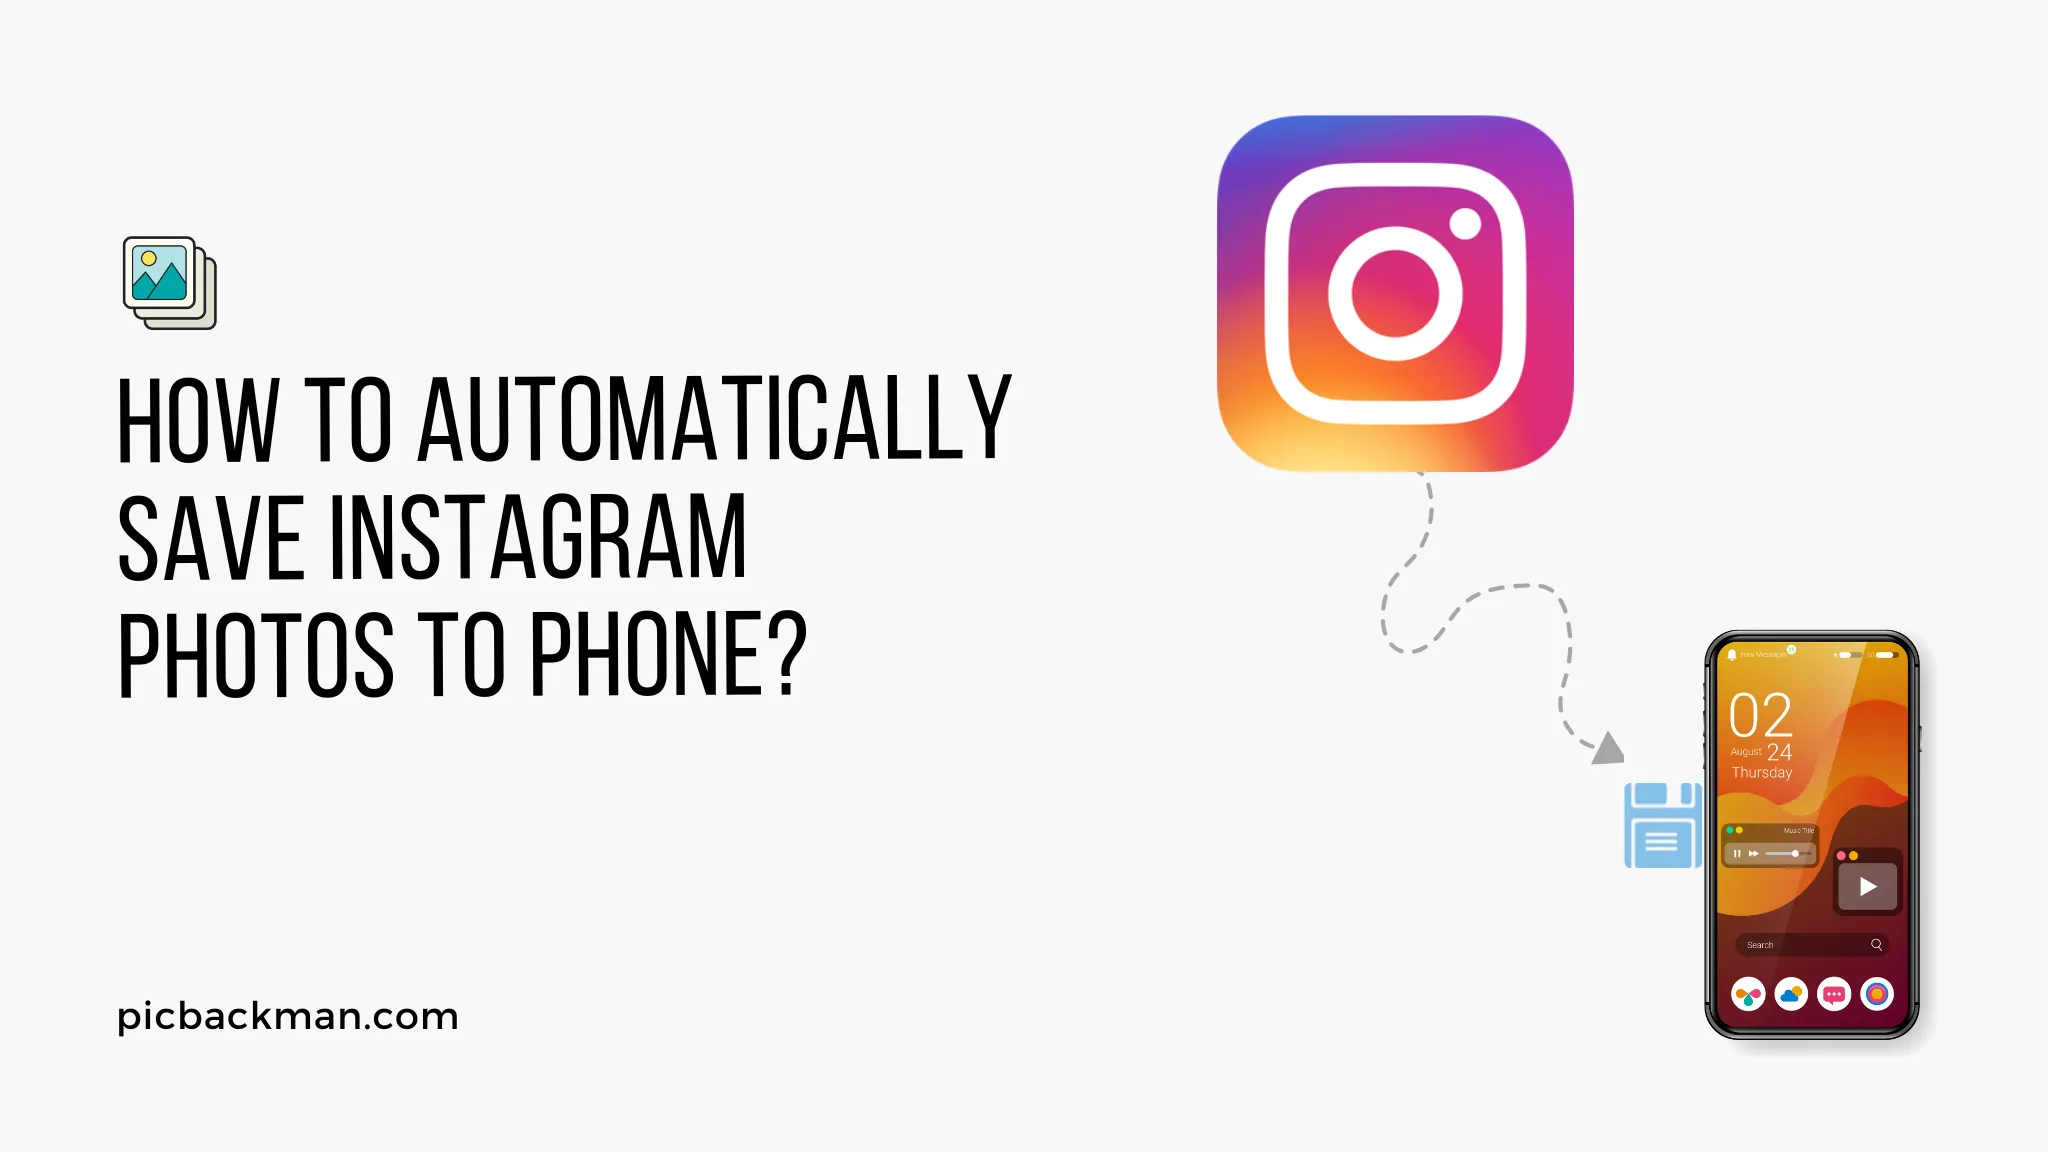 How to Automatically Save Instagram Photos to Phone